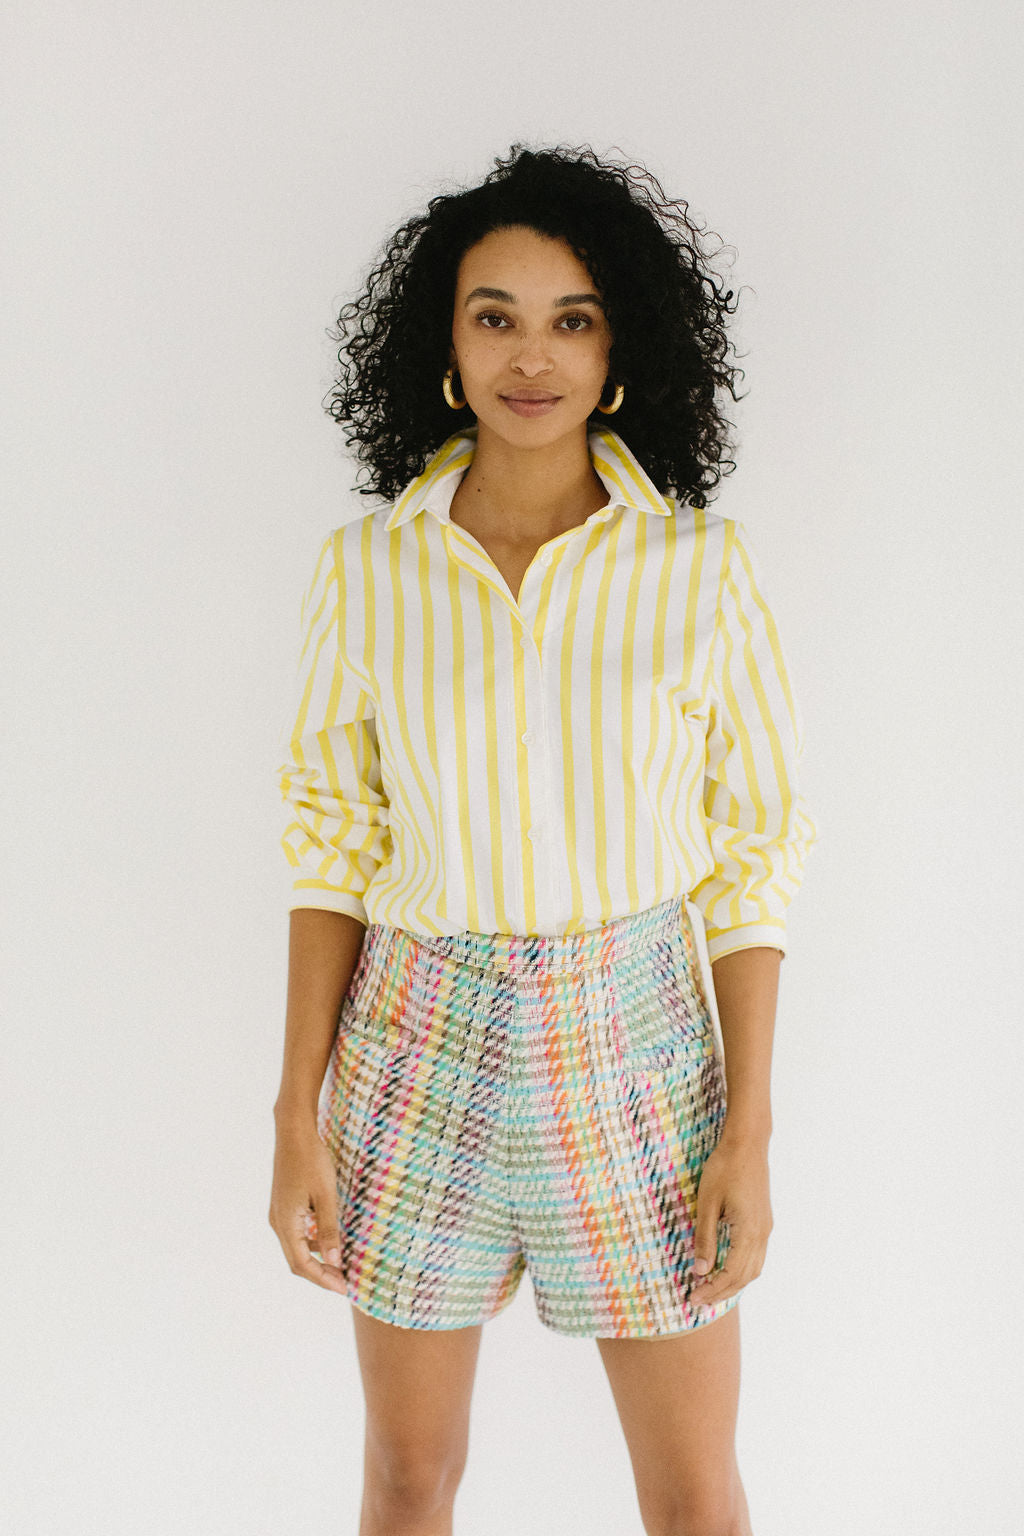 A woman with olive skin and short, black, curly hair staring directly at the camera with a small smile. She's wearing chunky gold hoop earrings, a white and yellow striped button down shirt pushed up to the elbows and a pair of colorful plaid shorts.